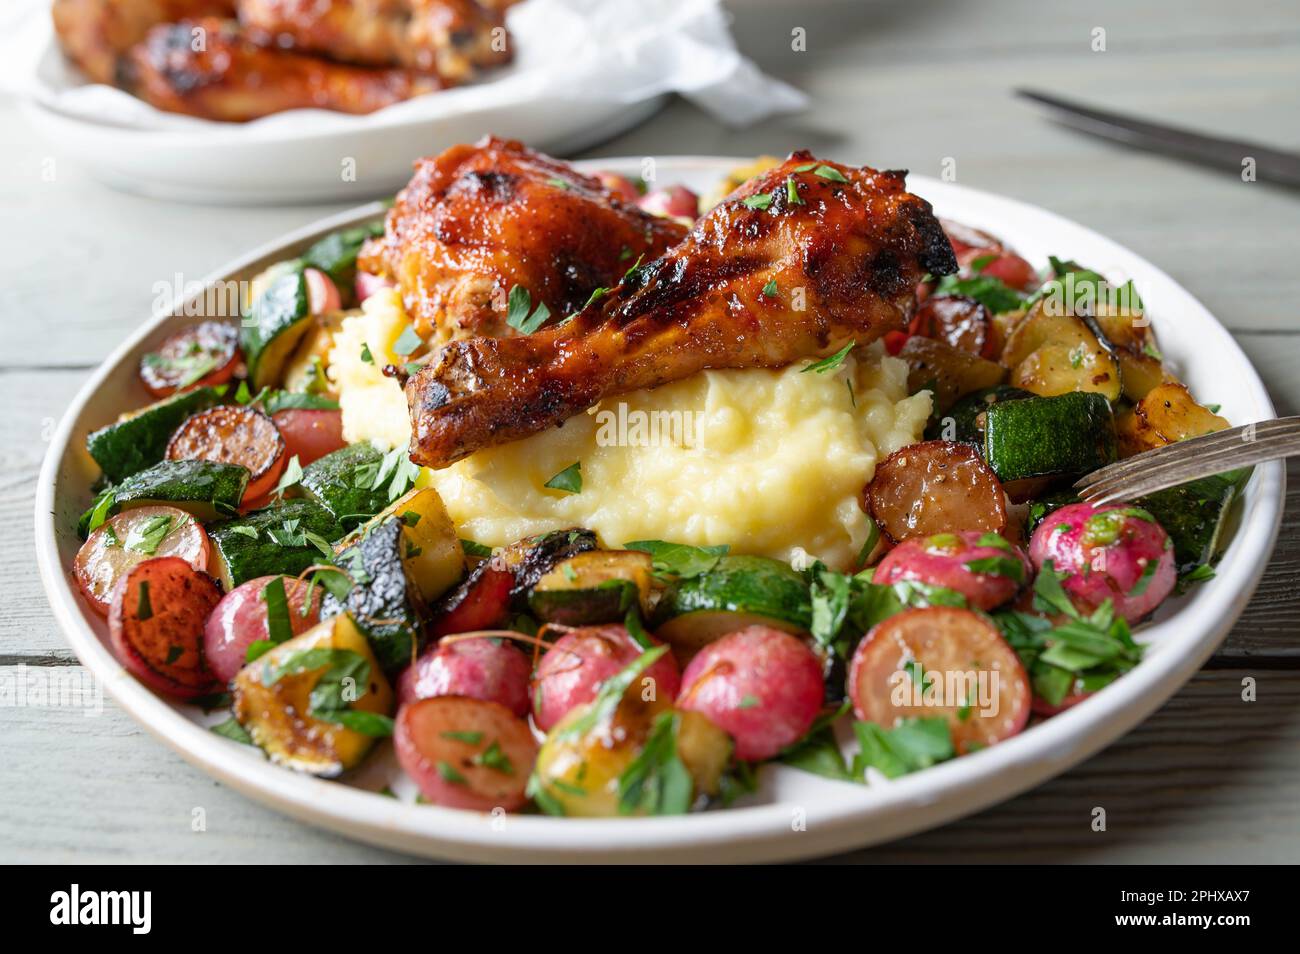 Roasted vegetables with glazed barbecue chicken drumsticks and mashed potatoes on a plate Stock Photo